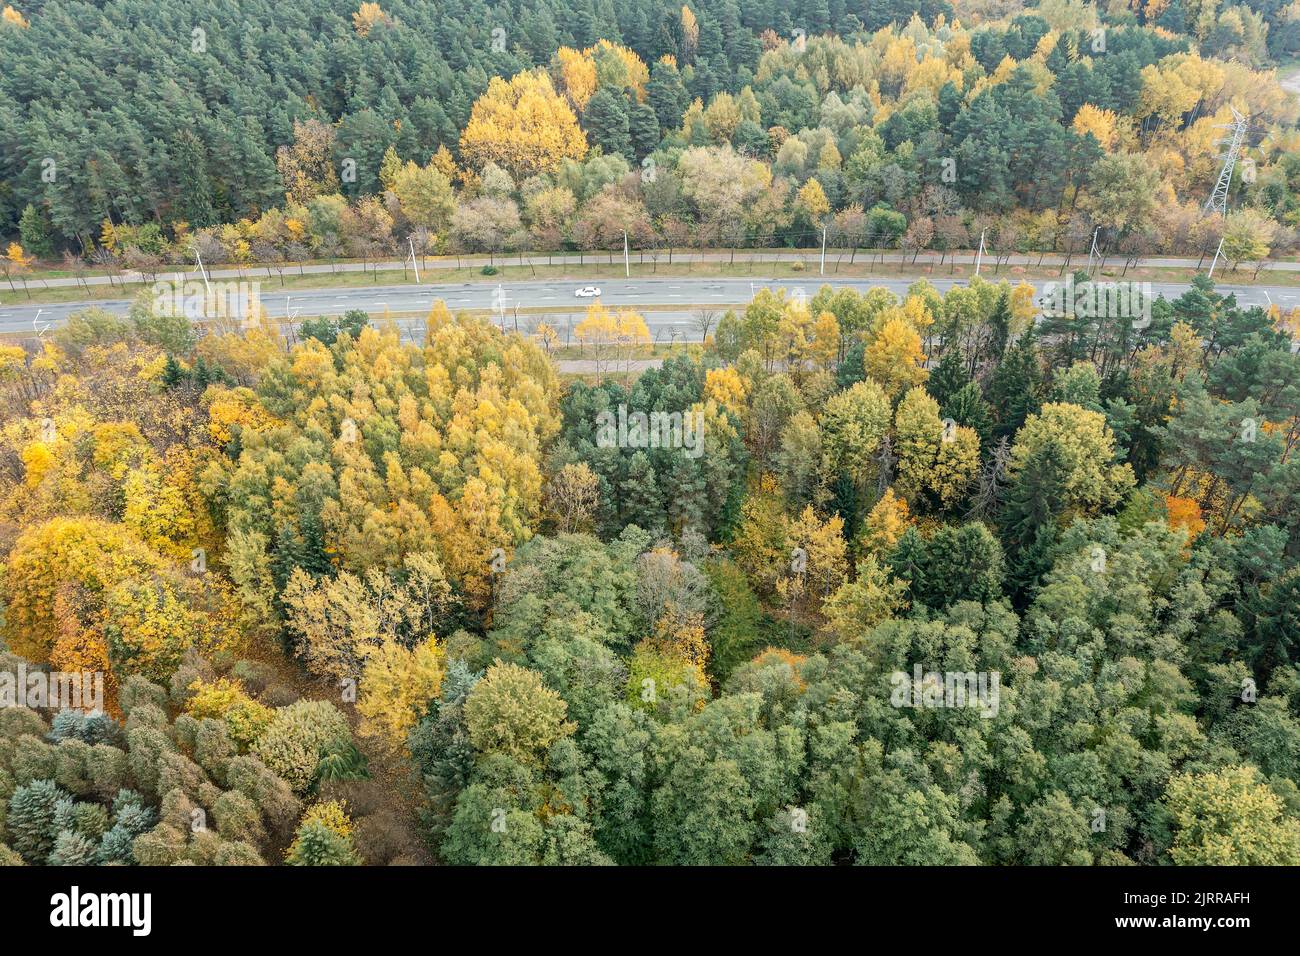 asphalt road with car passing through autumn forest. landscape aerial view. Stock Photo